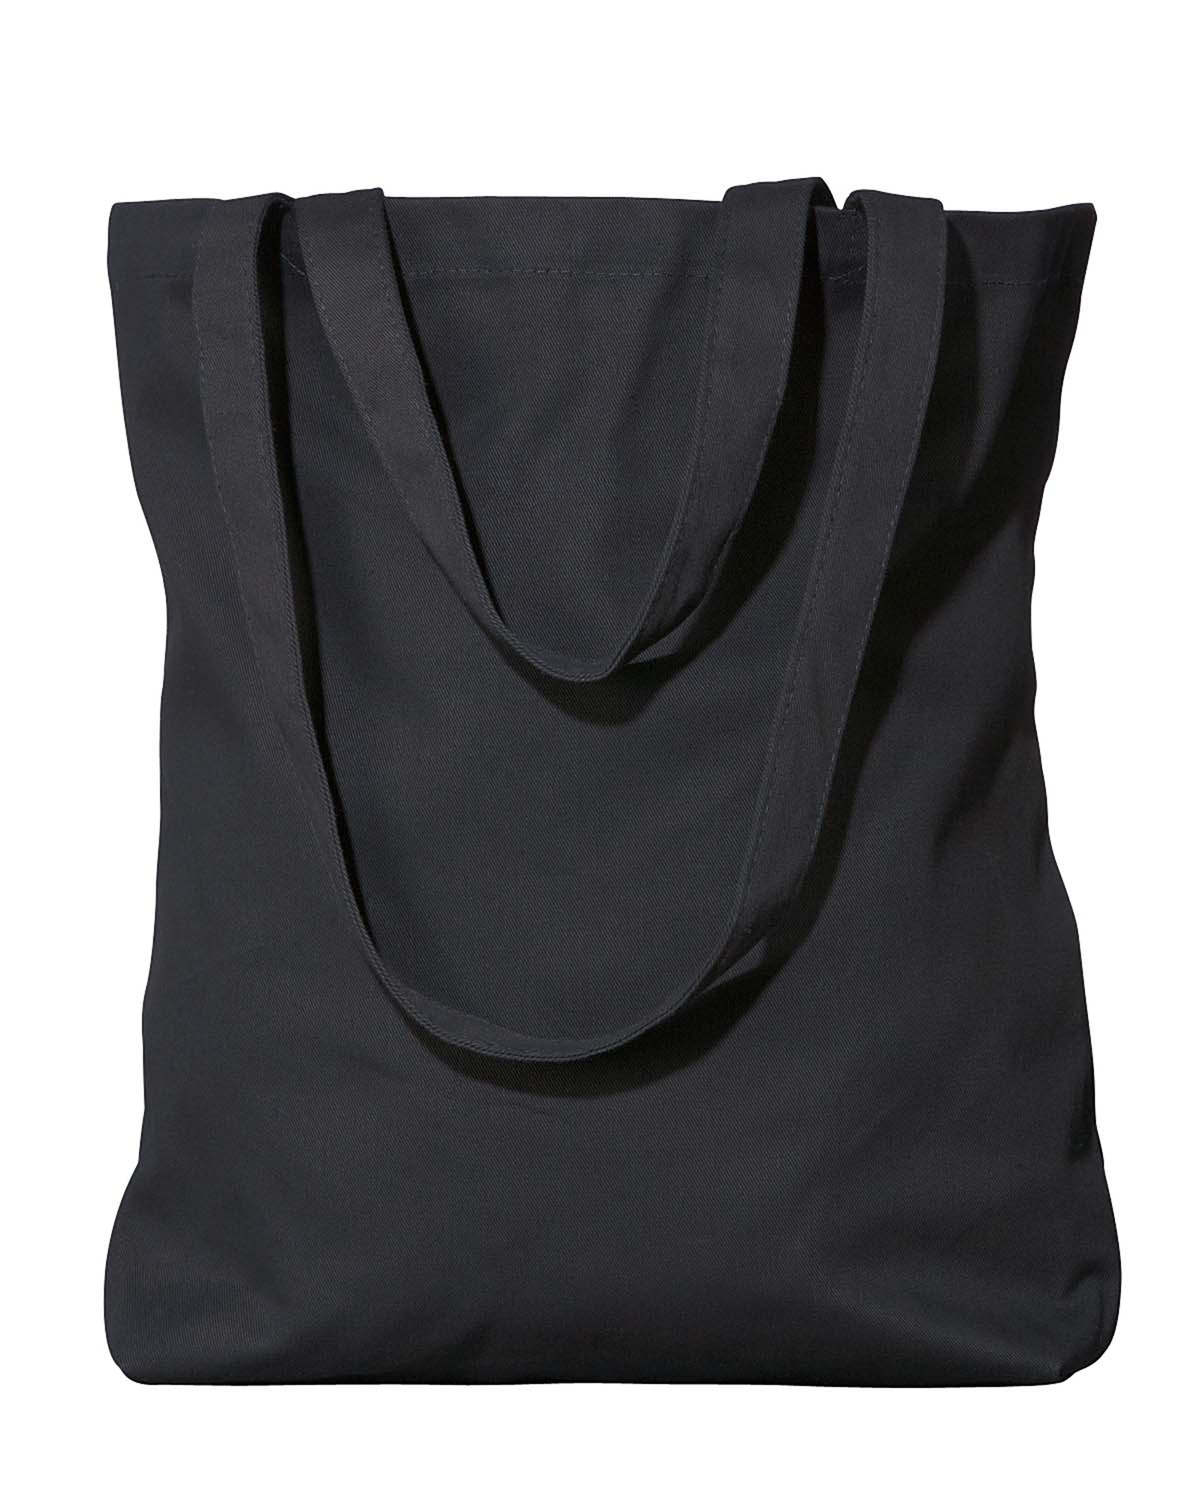 Econscious EC8000 - Organic Cotton Twill Every Day Tote